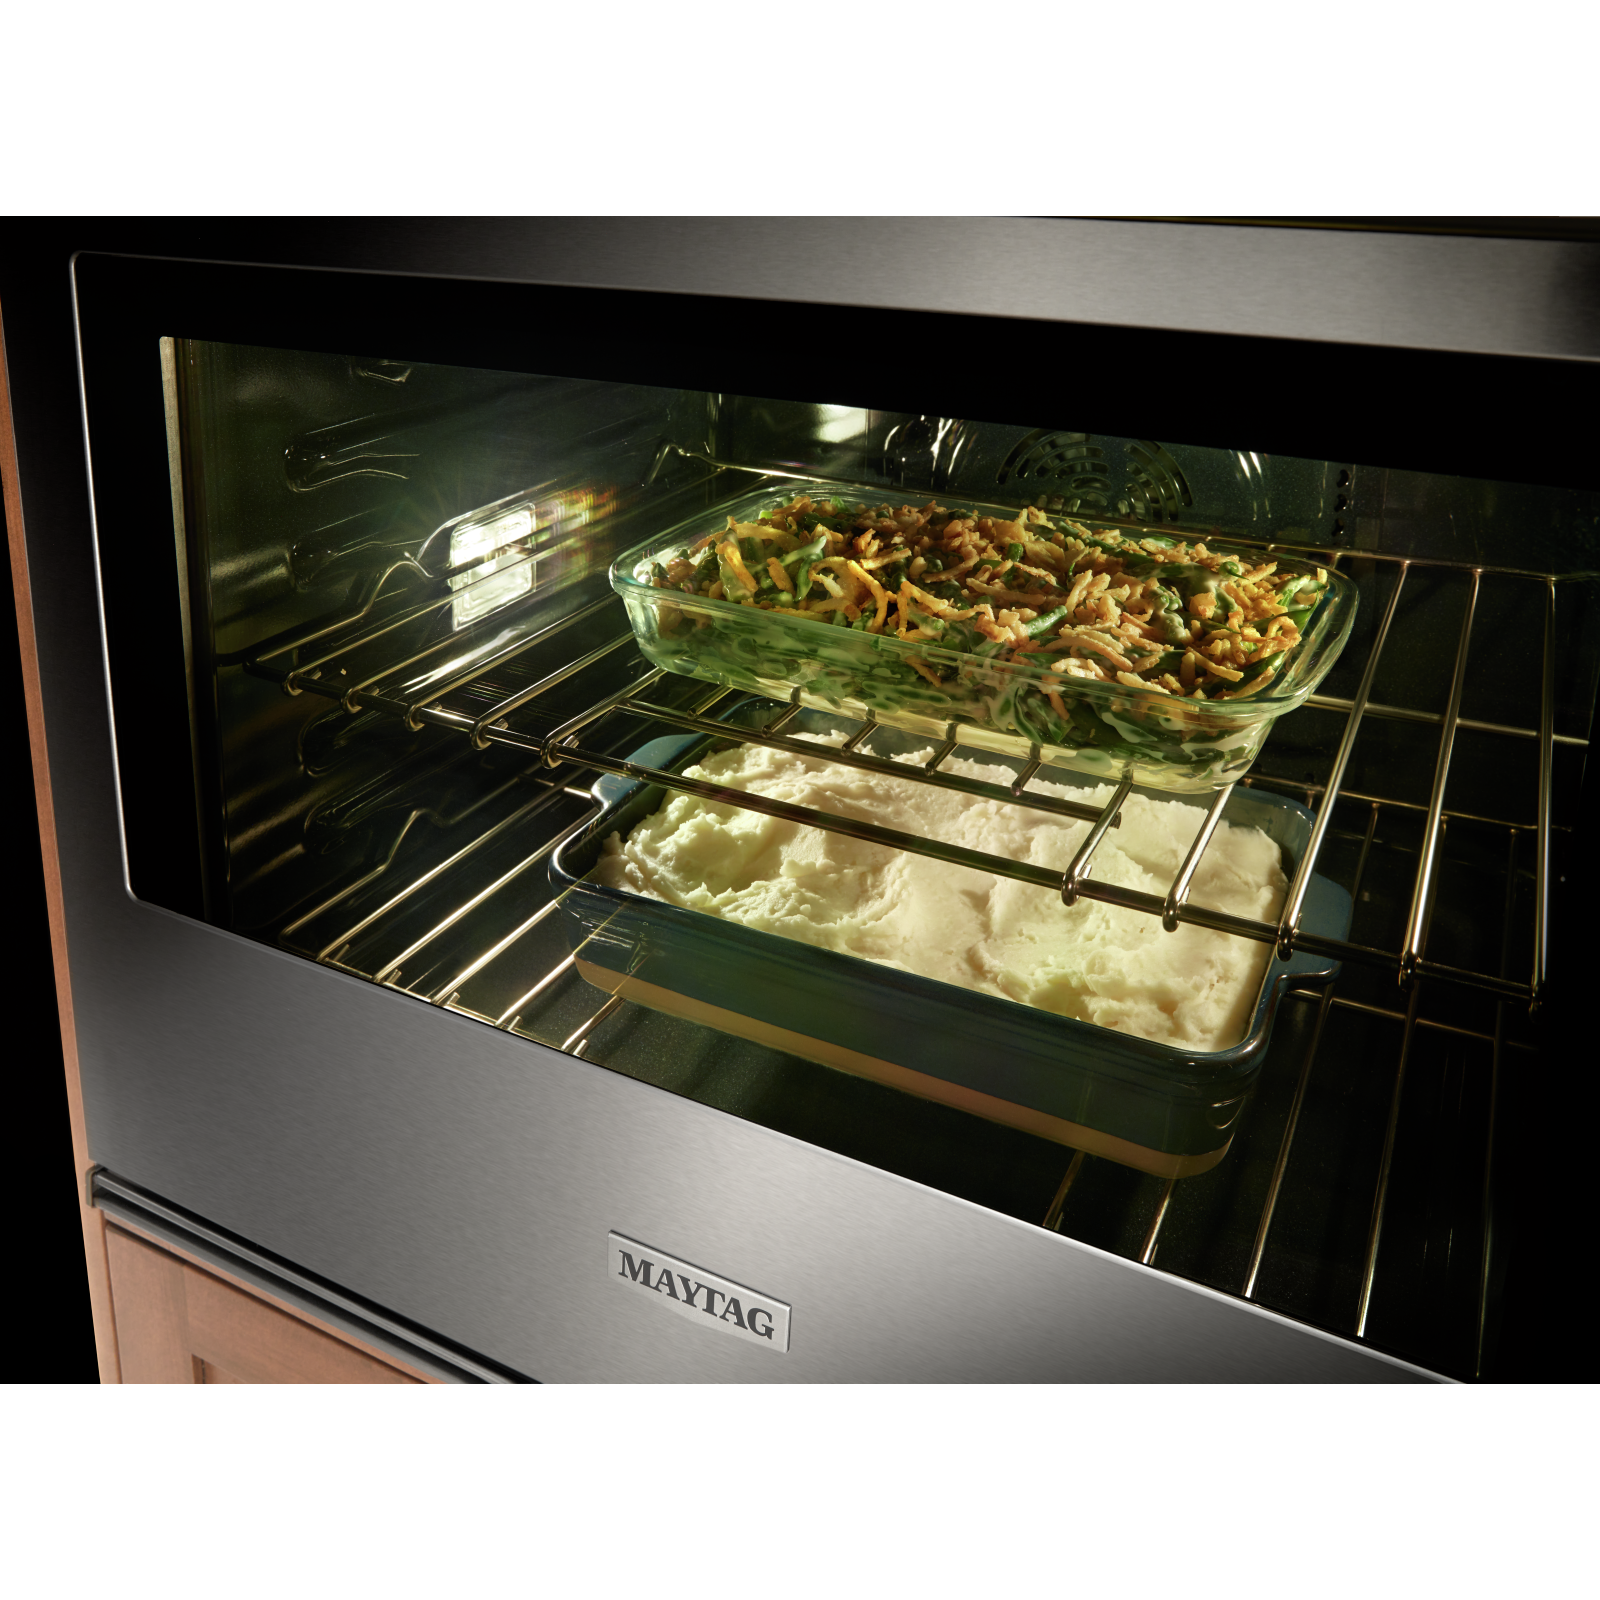 Maytag - 6.4 cu. ft Combination Wall Oven in Stainless - MOEC6030LZ